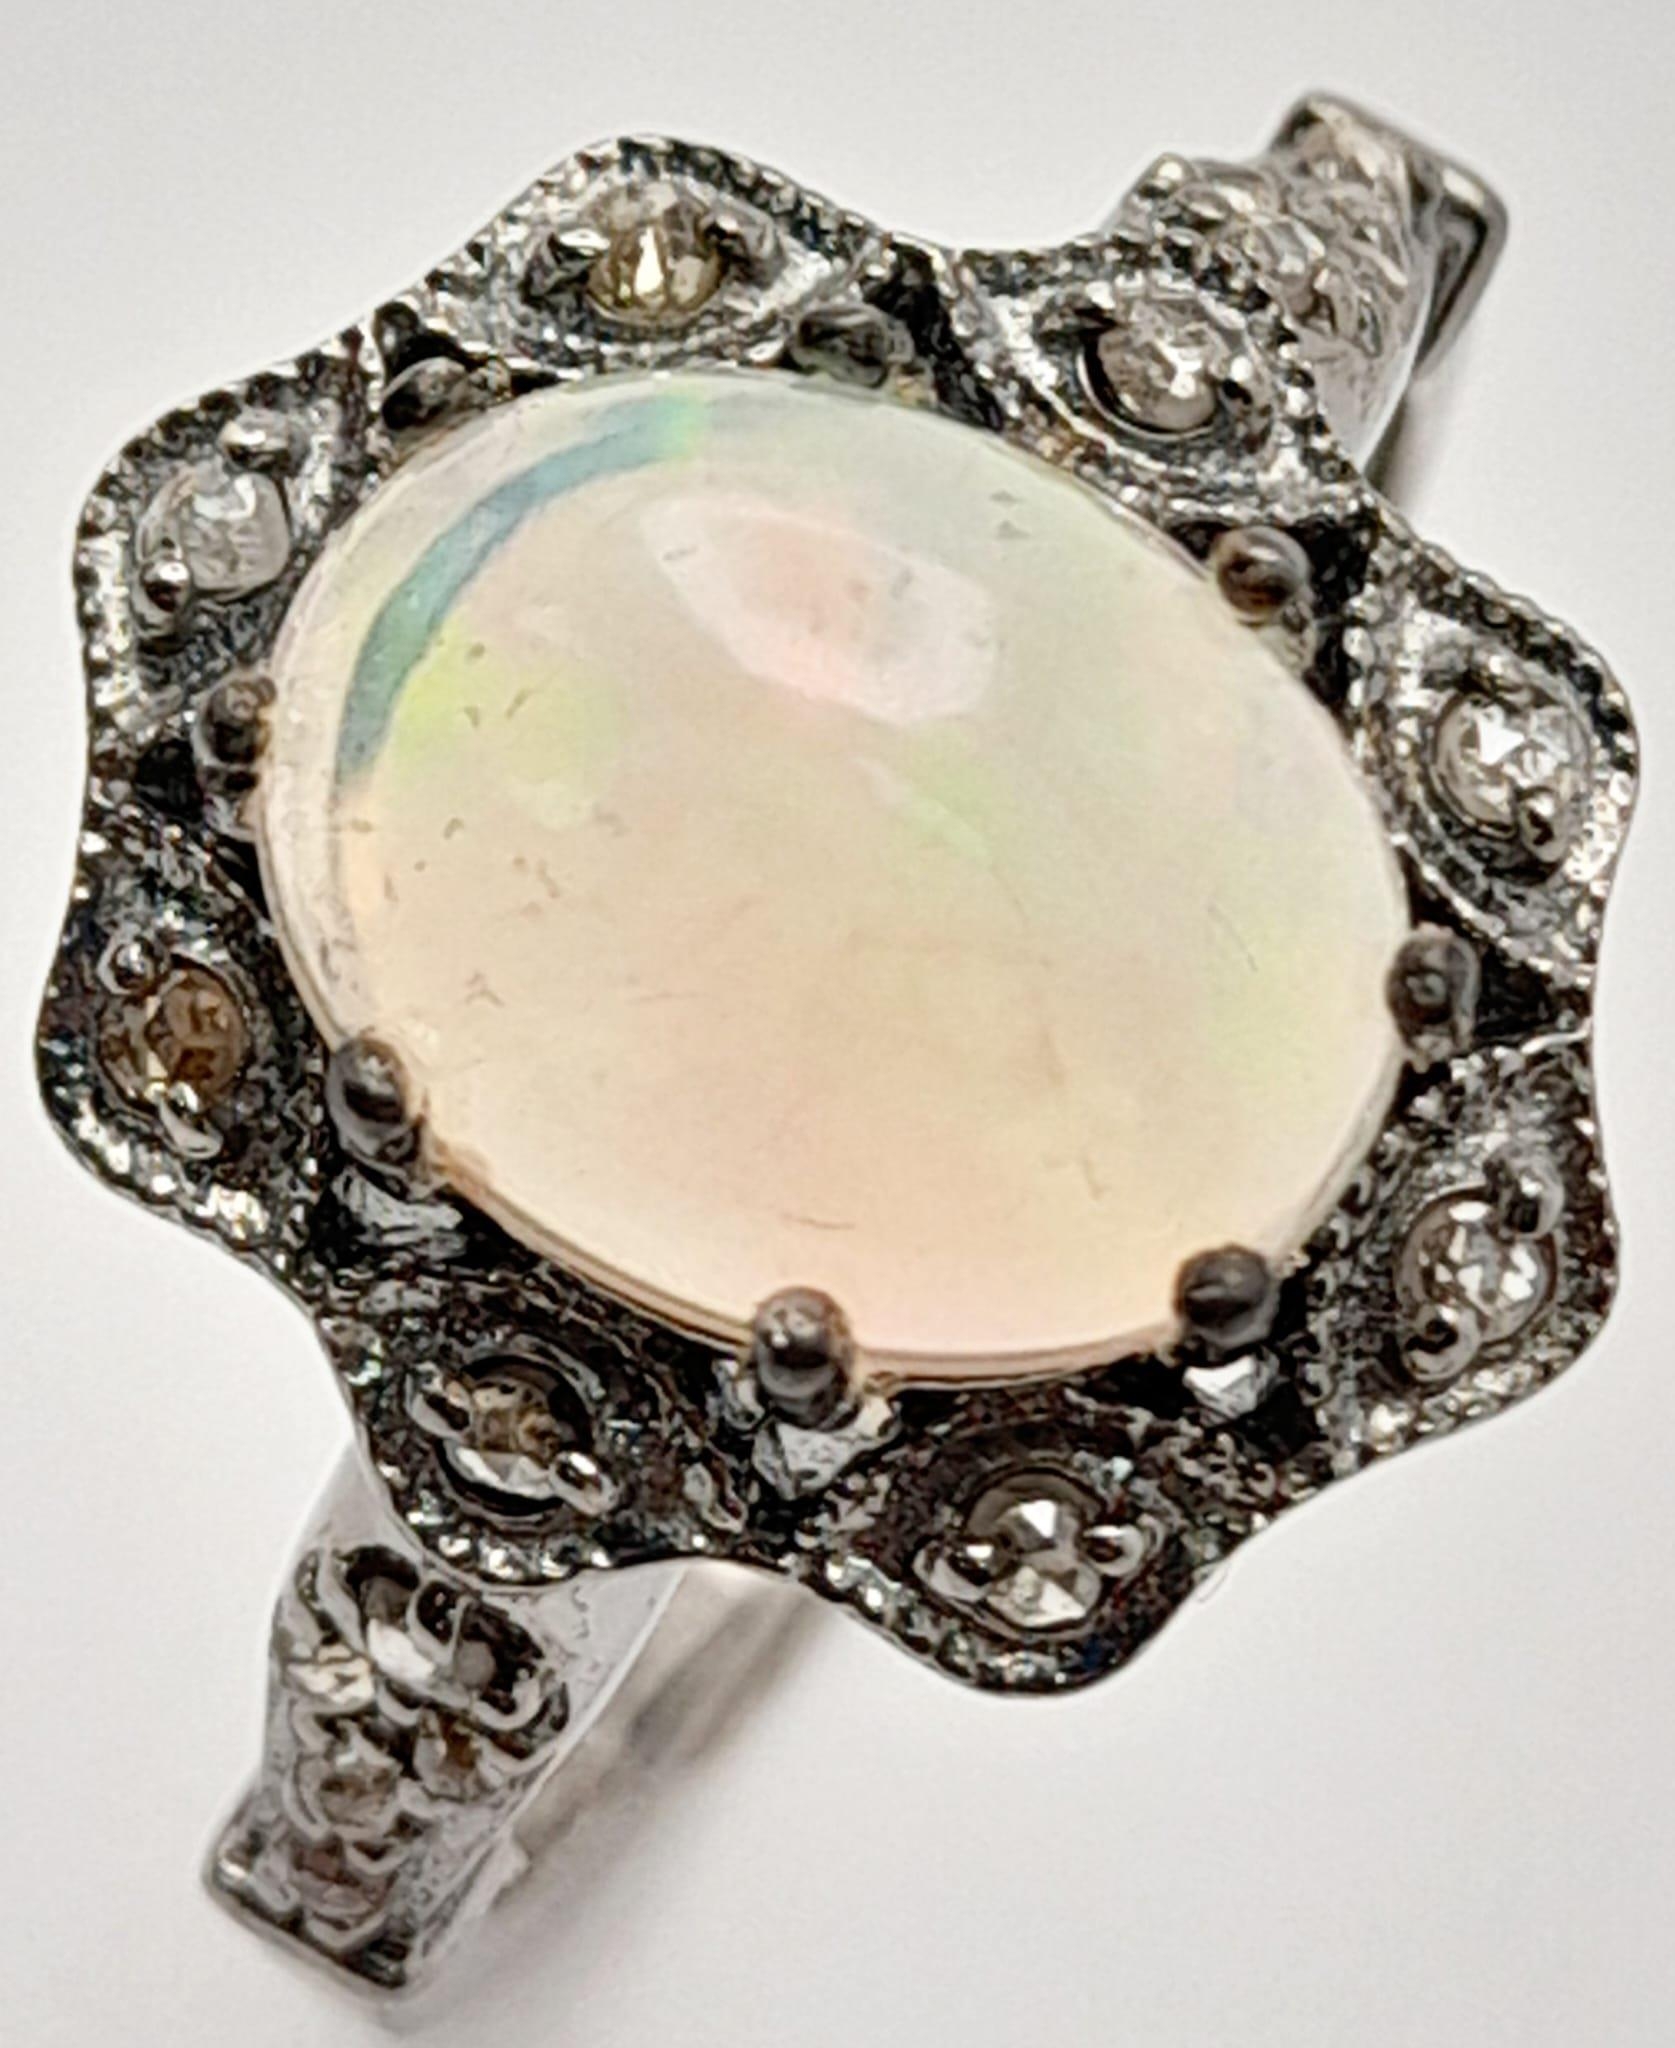 An Ethiopian Opal Ring with Rose Cut diamond Surround and Accents. Set in 925 Sterling silver.